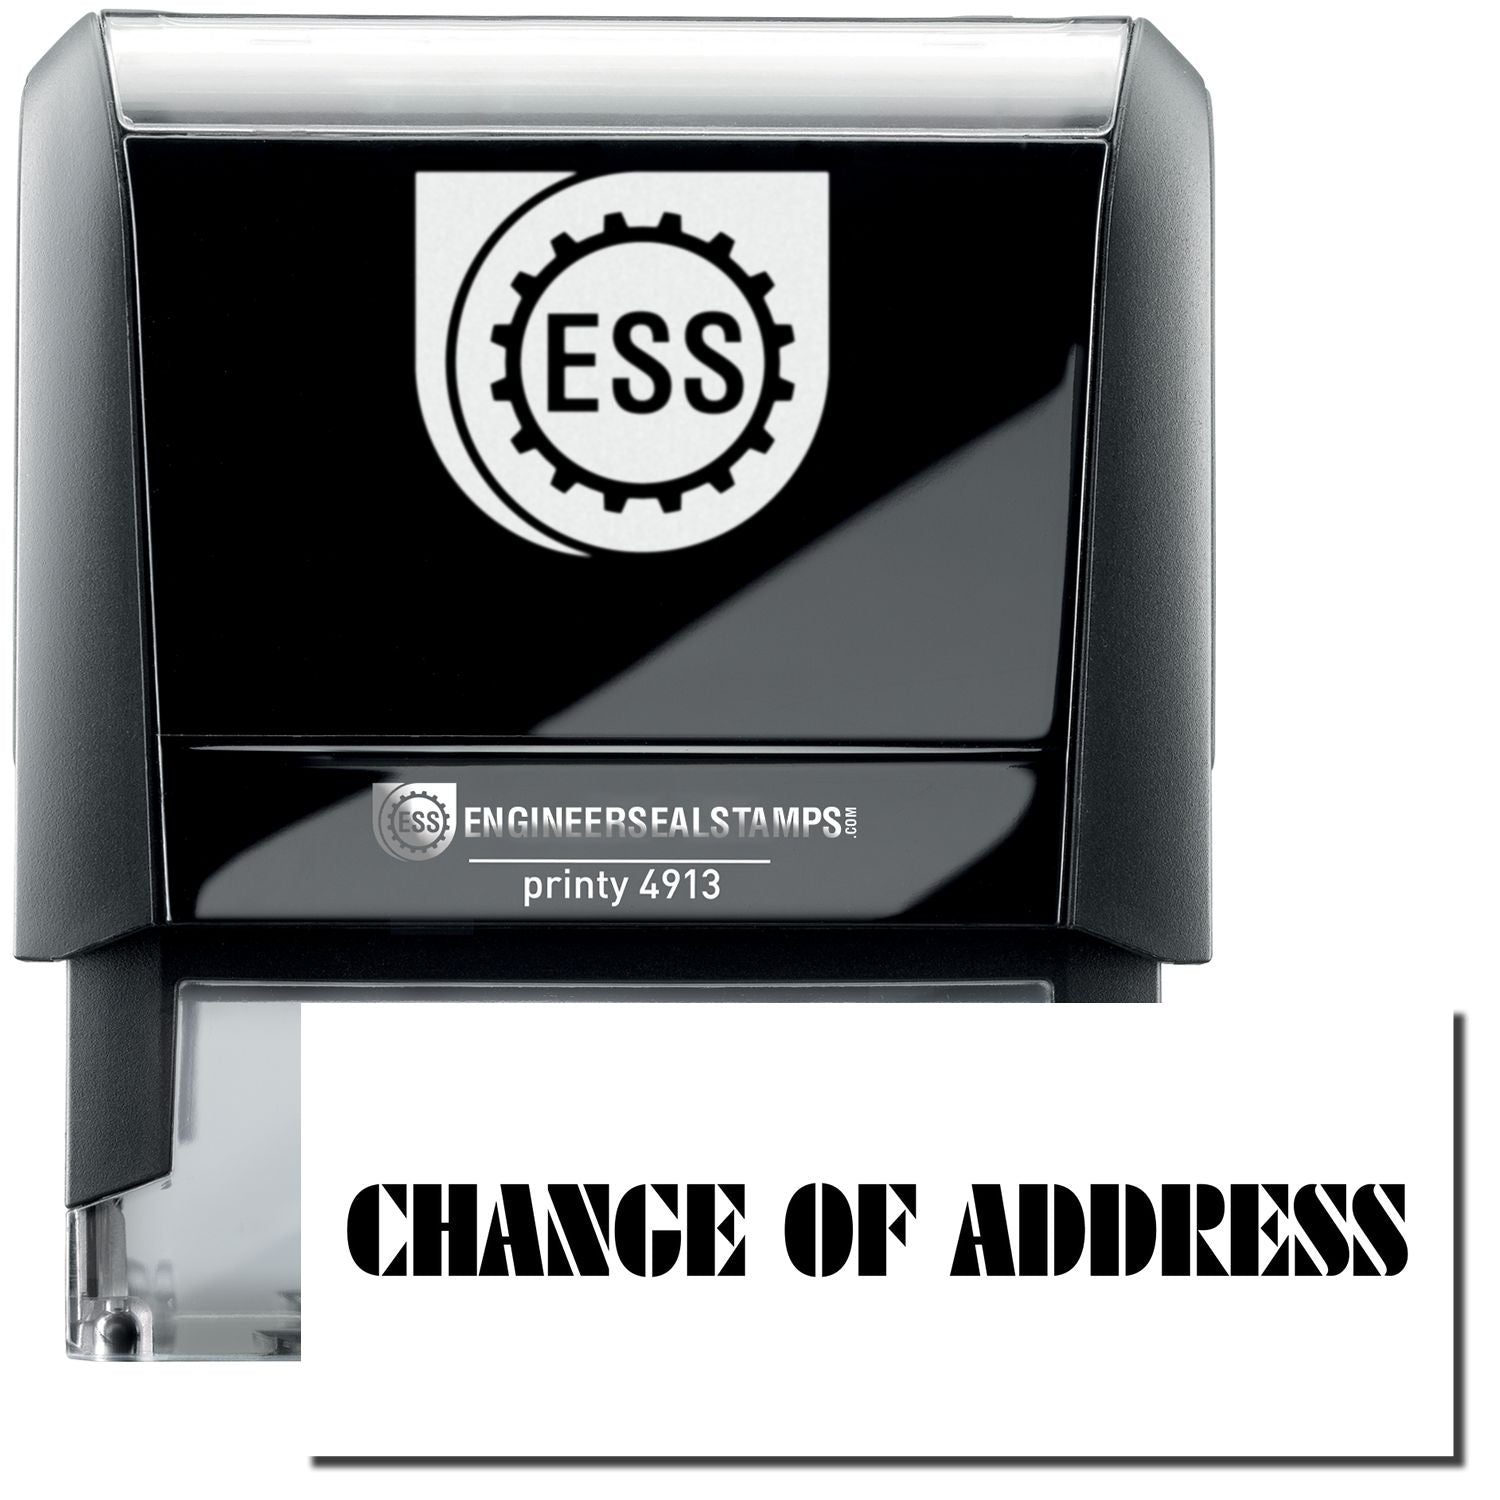 A self-inking stamp with a stamped image showing how the text "CHANGE OF ADDRESS" in a unique-looking large bold font is displayed by it.